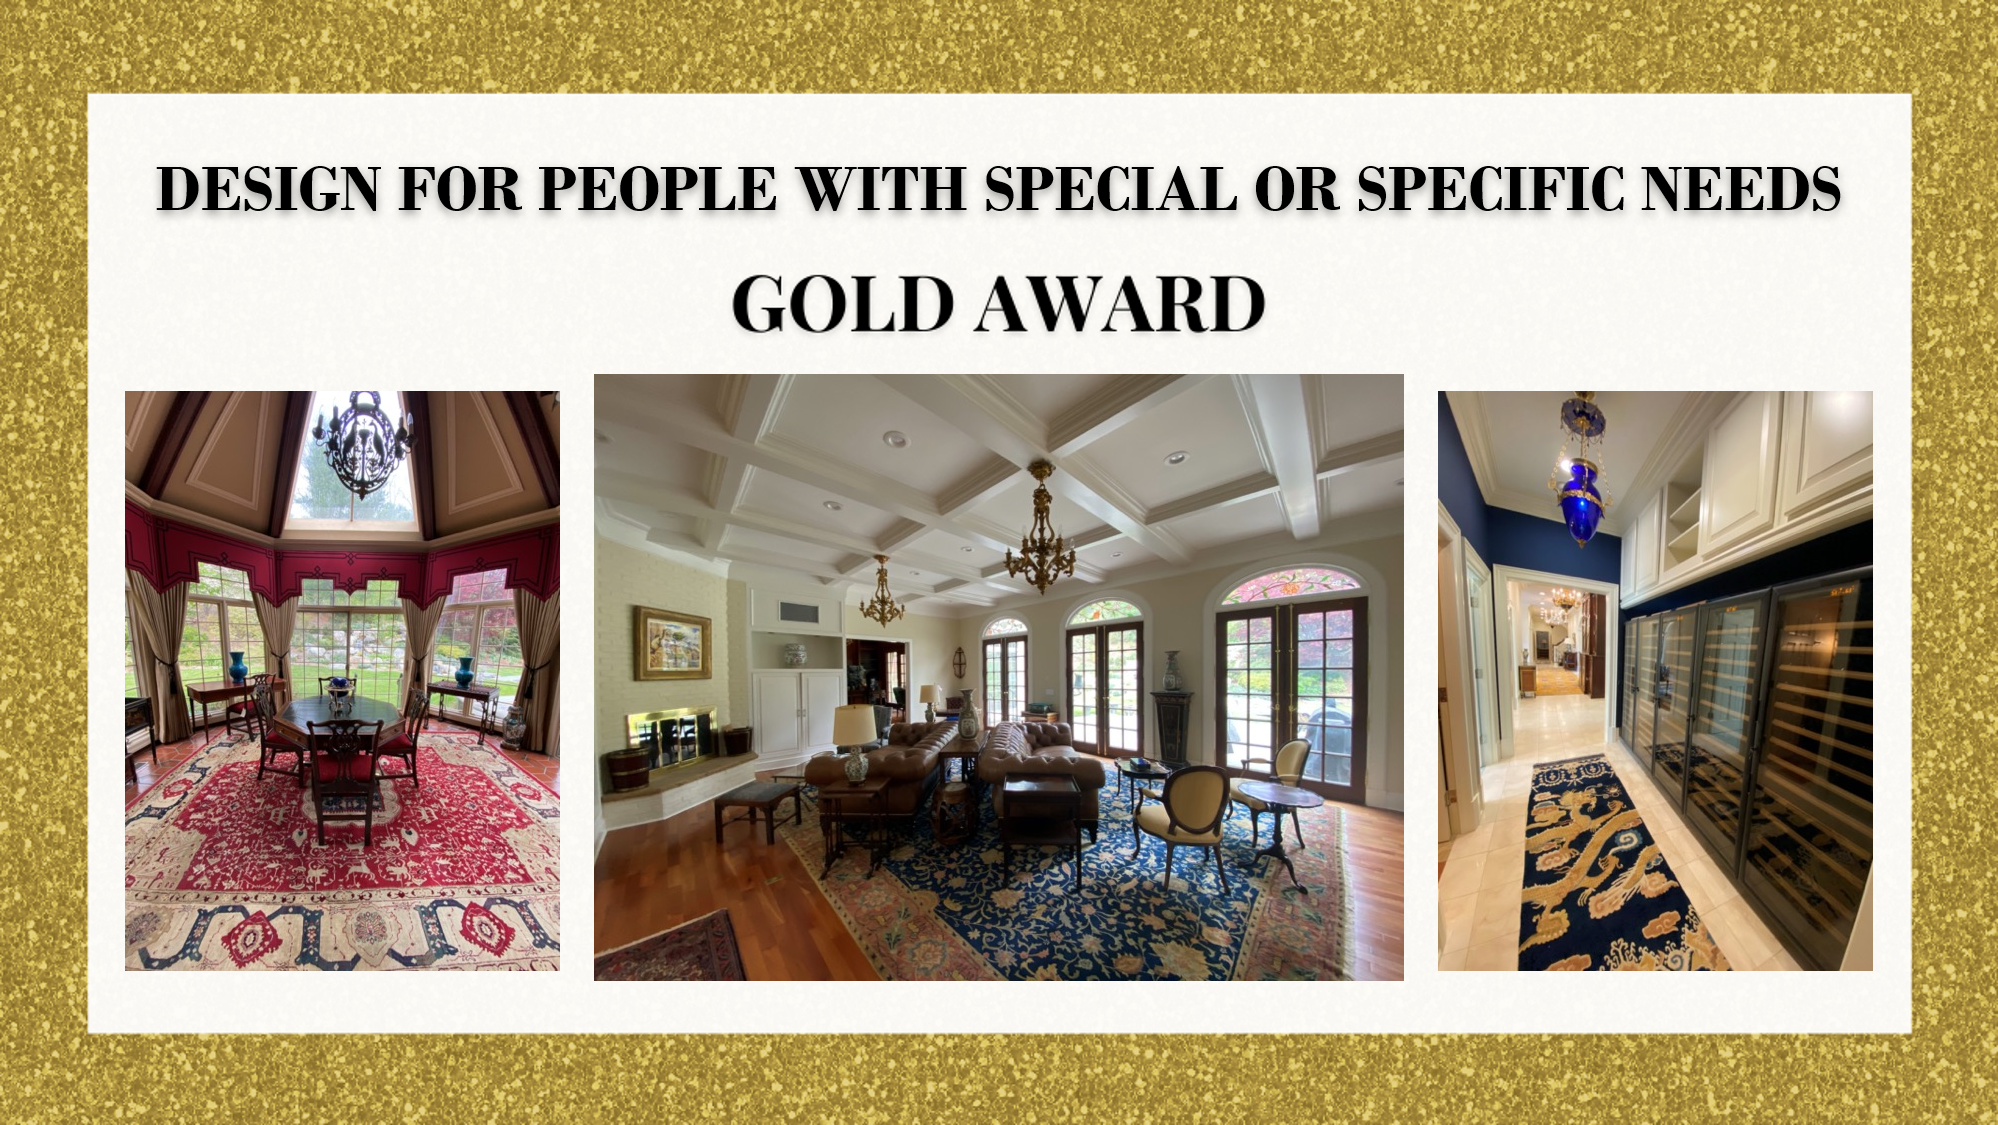 Gold Award Design For People With Special or Specific Needs